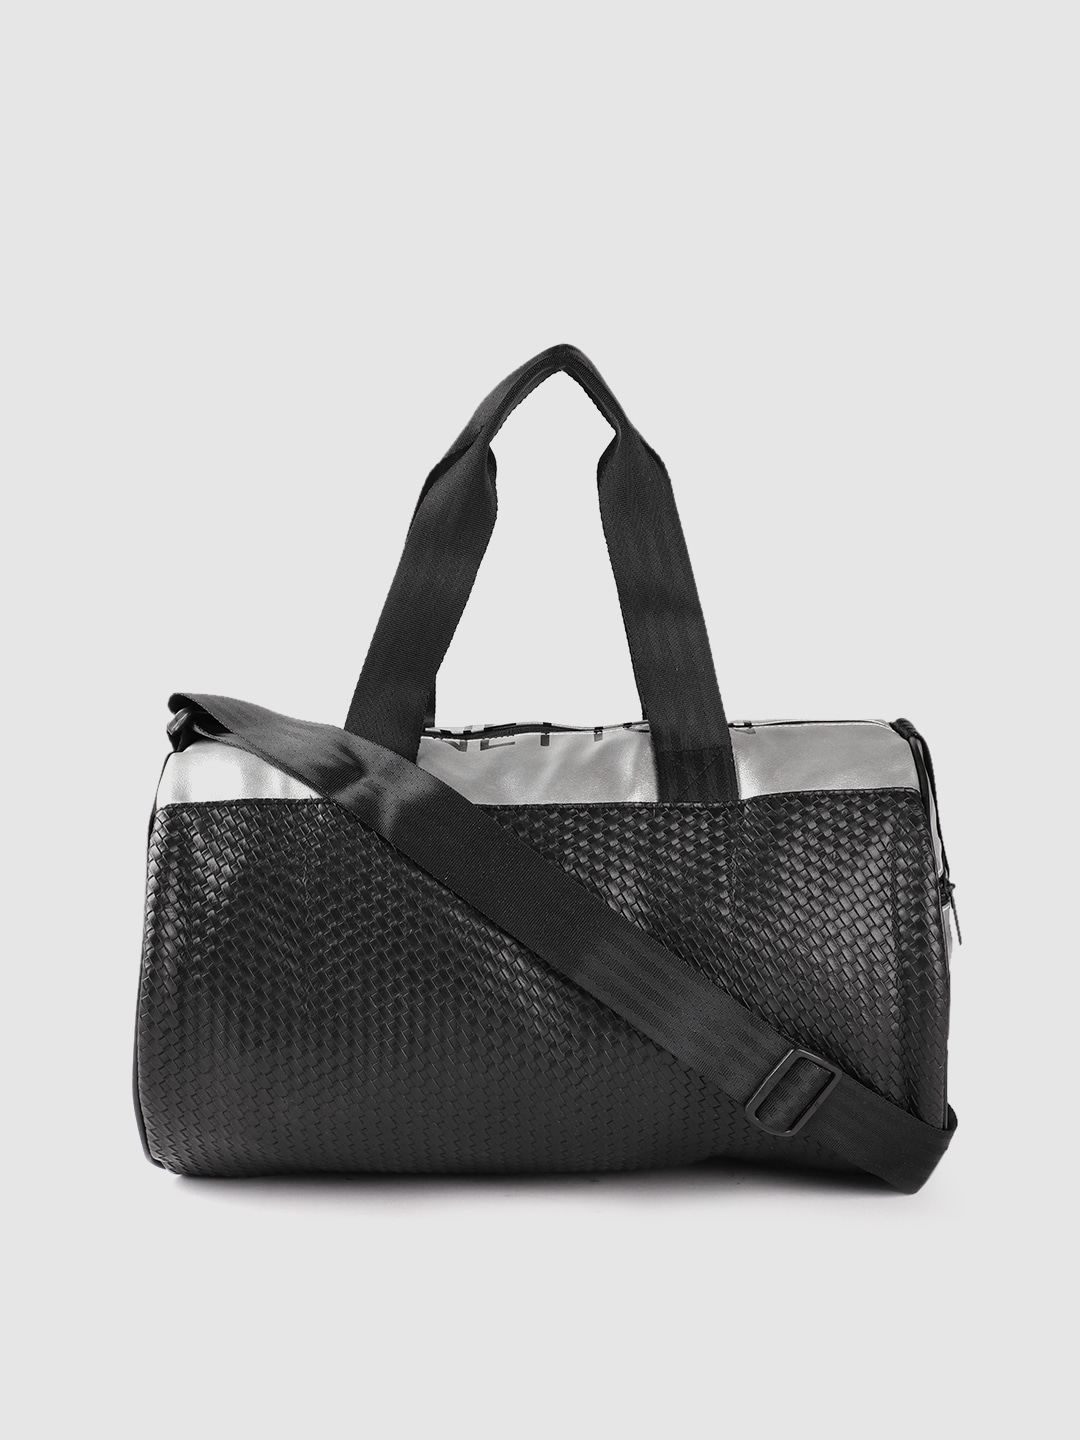 Accessories Duffel Bag | United Colors of Benetton Unisex Black & Silver-Toned Basket Weave Textured Gym Duffle Bag - IM63596